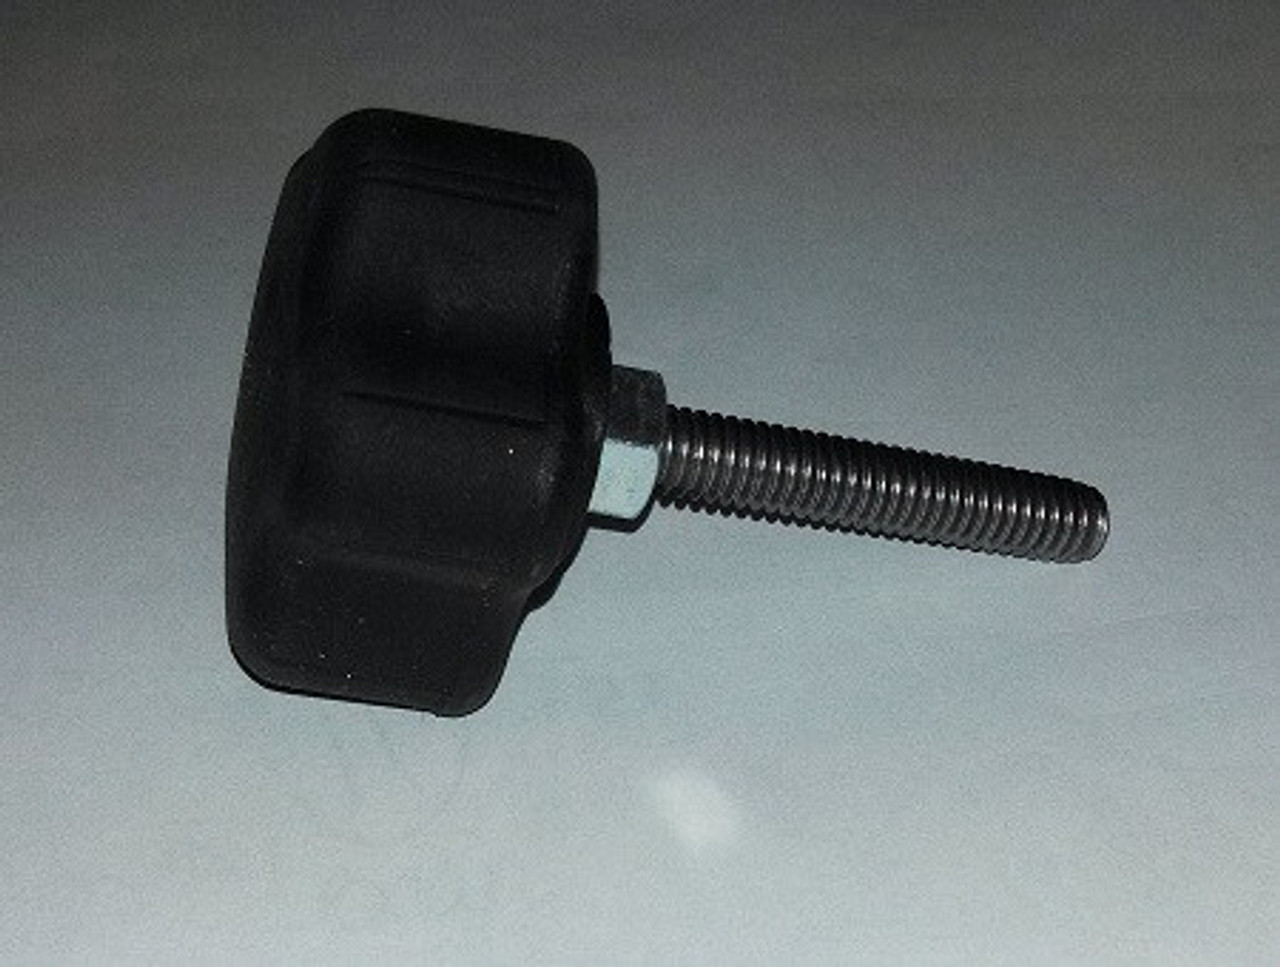 Looking for Zenith Cervical Drop Tension Knob, Zenith Cervical Drop Tension Knob for sale, Zenith Cervical Tension Knob, Zenith Tension Knob, Replacement Zenith Cervical Drop Tension Knob, Zenith knob, Zenith parts, Zenith table parts?